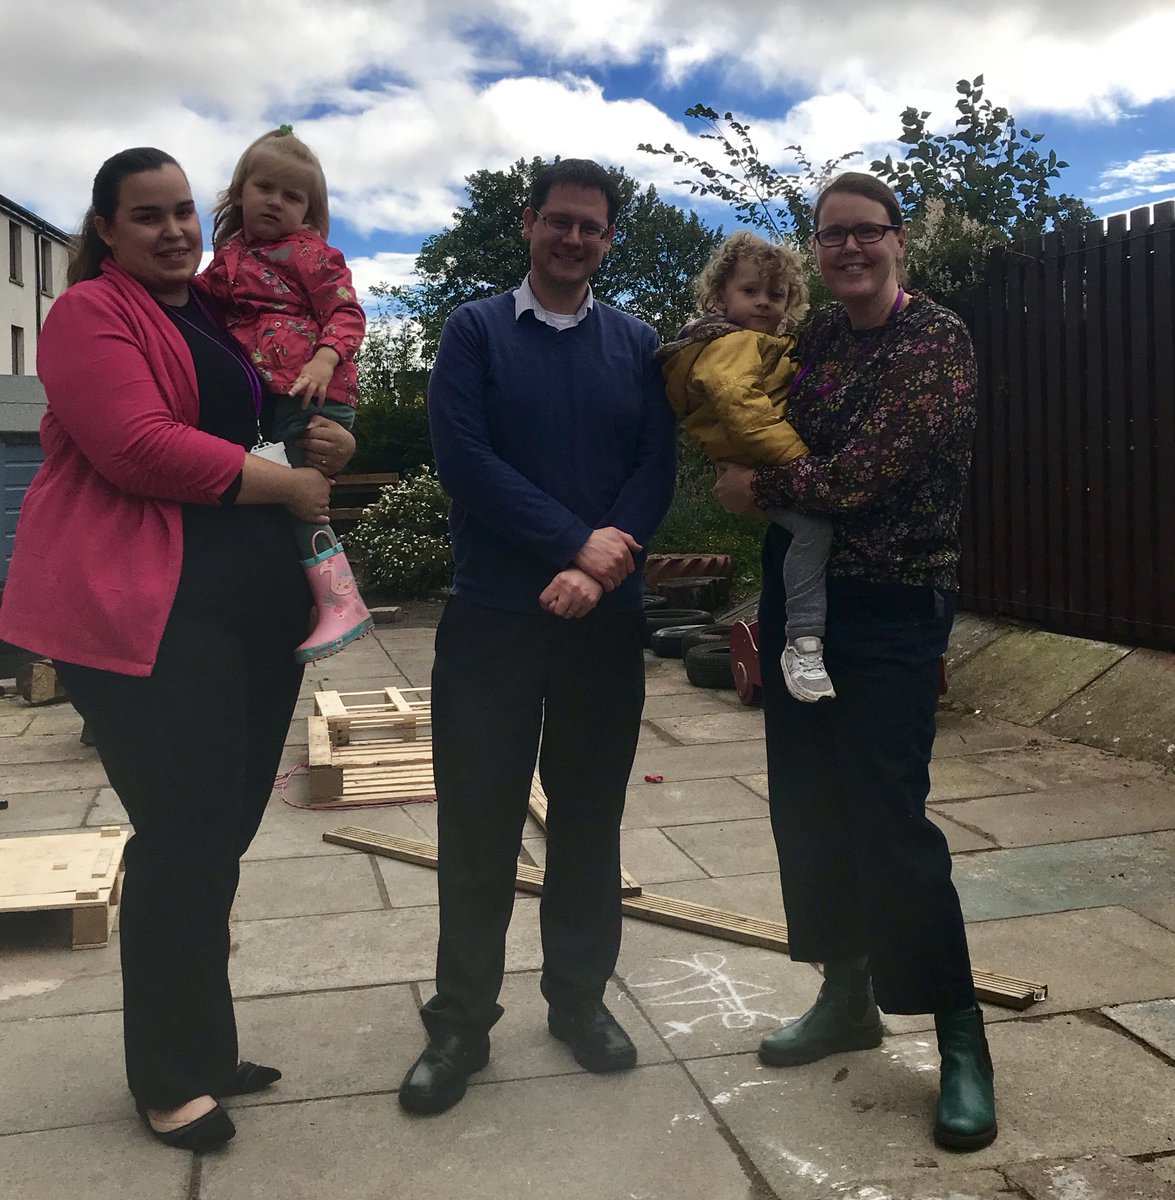 We were delighted to welcome Euan Carmichael of @scotgov to our setting in Dundee to explain our flexible childcare service delivery model. #earlyyears #flexiblechildcare   #childcaredundee #expansionplans #1140hours #Blueprint2020 @MareeToddMSP @DundeeCouncil